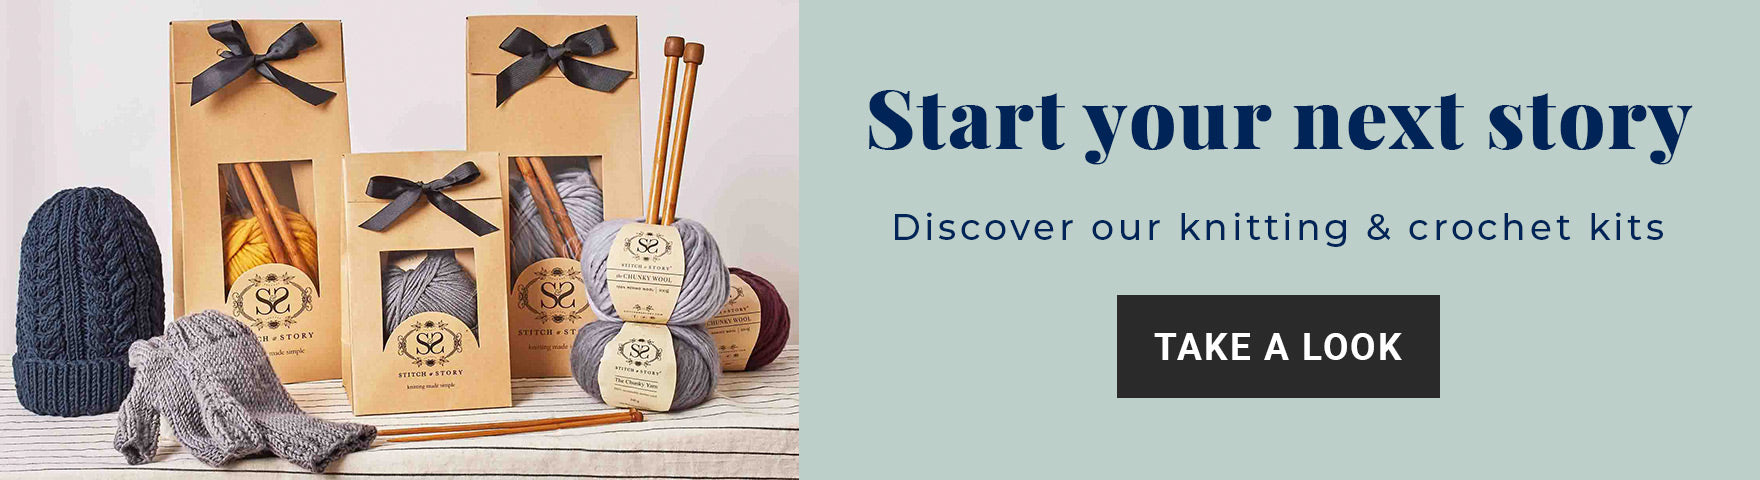 Shop for all-in-one knitting and crochet kits at Stitch & Story